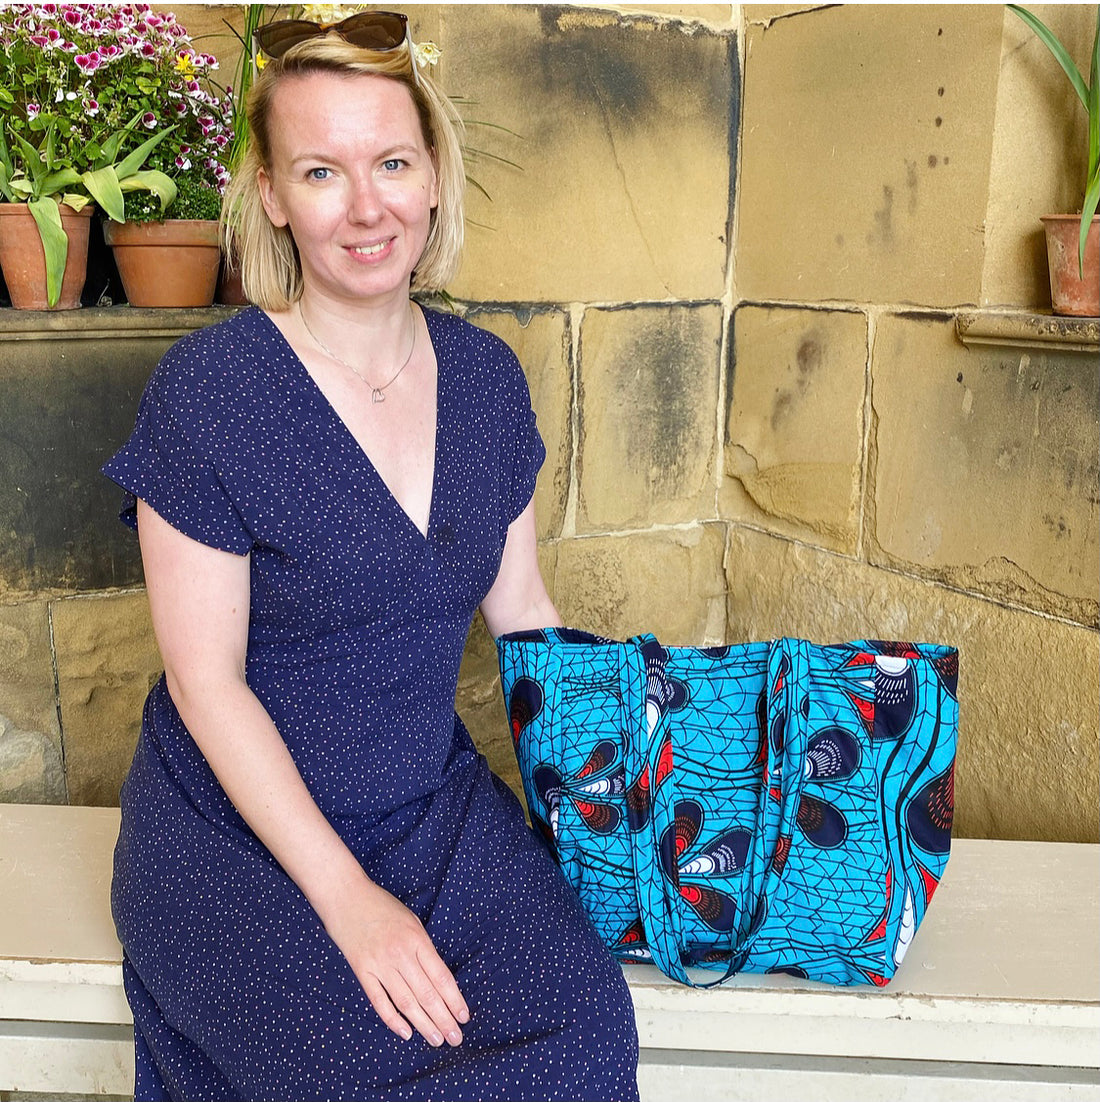 The Toni Box Bag - Let's sew some Arm Candy: African print style!